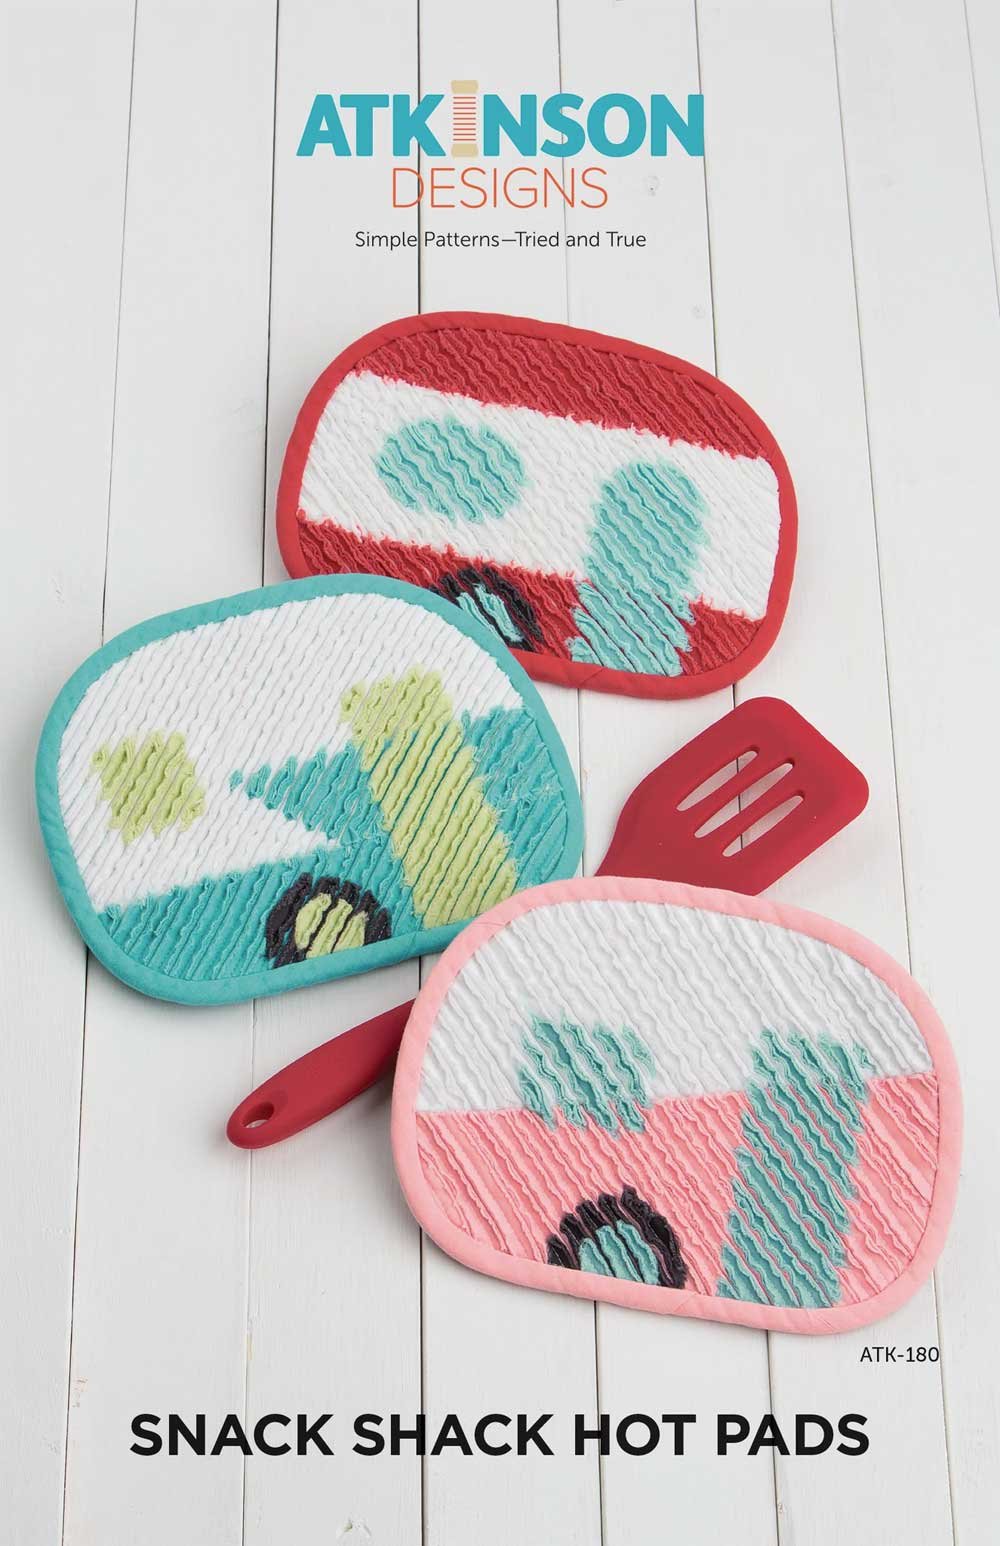 These hot pads are so cute you’ll want to make a whole camper full of them.